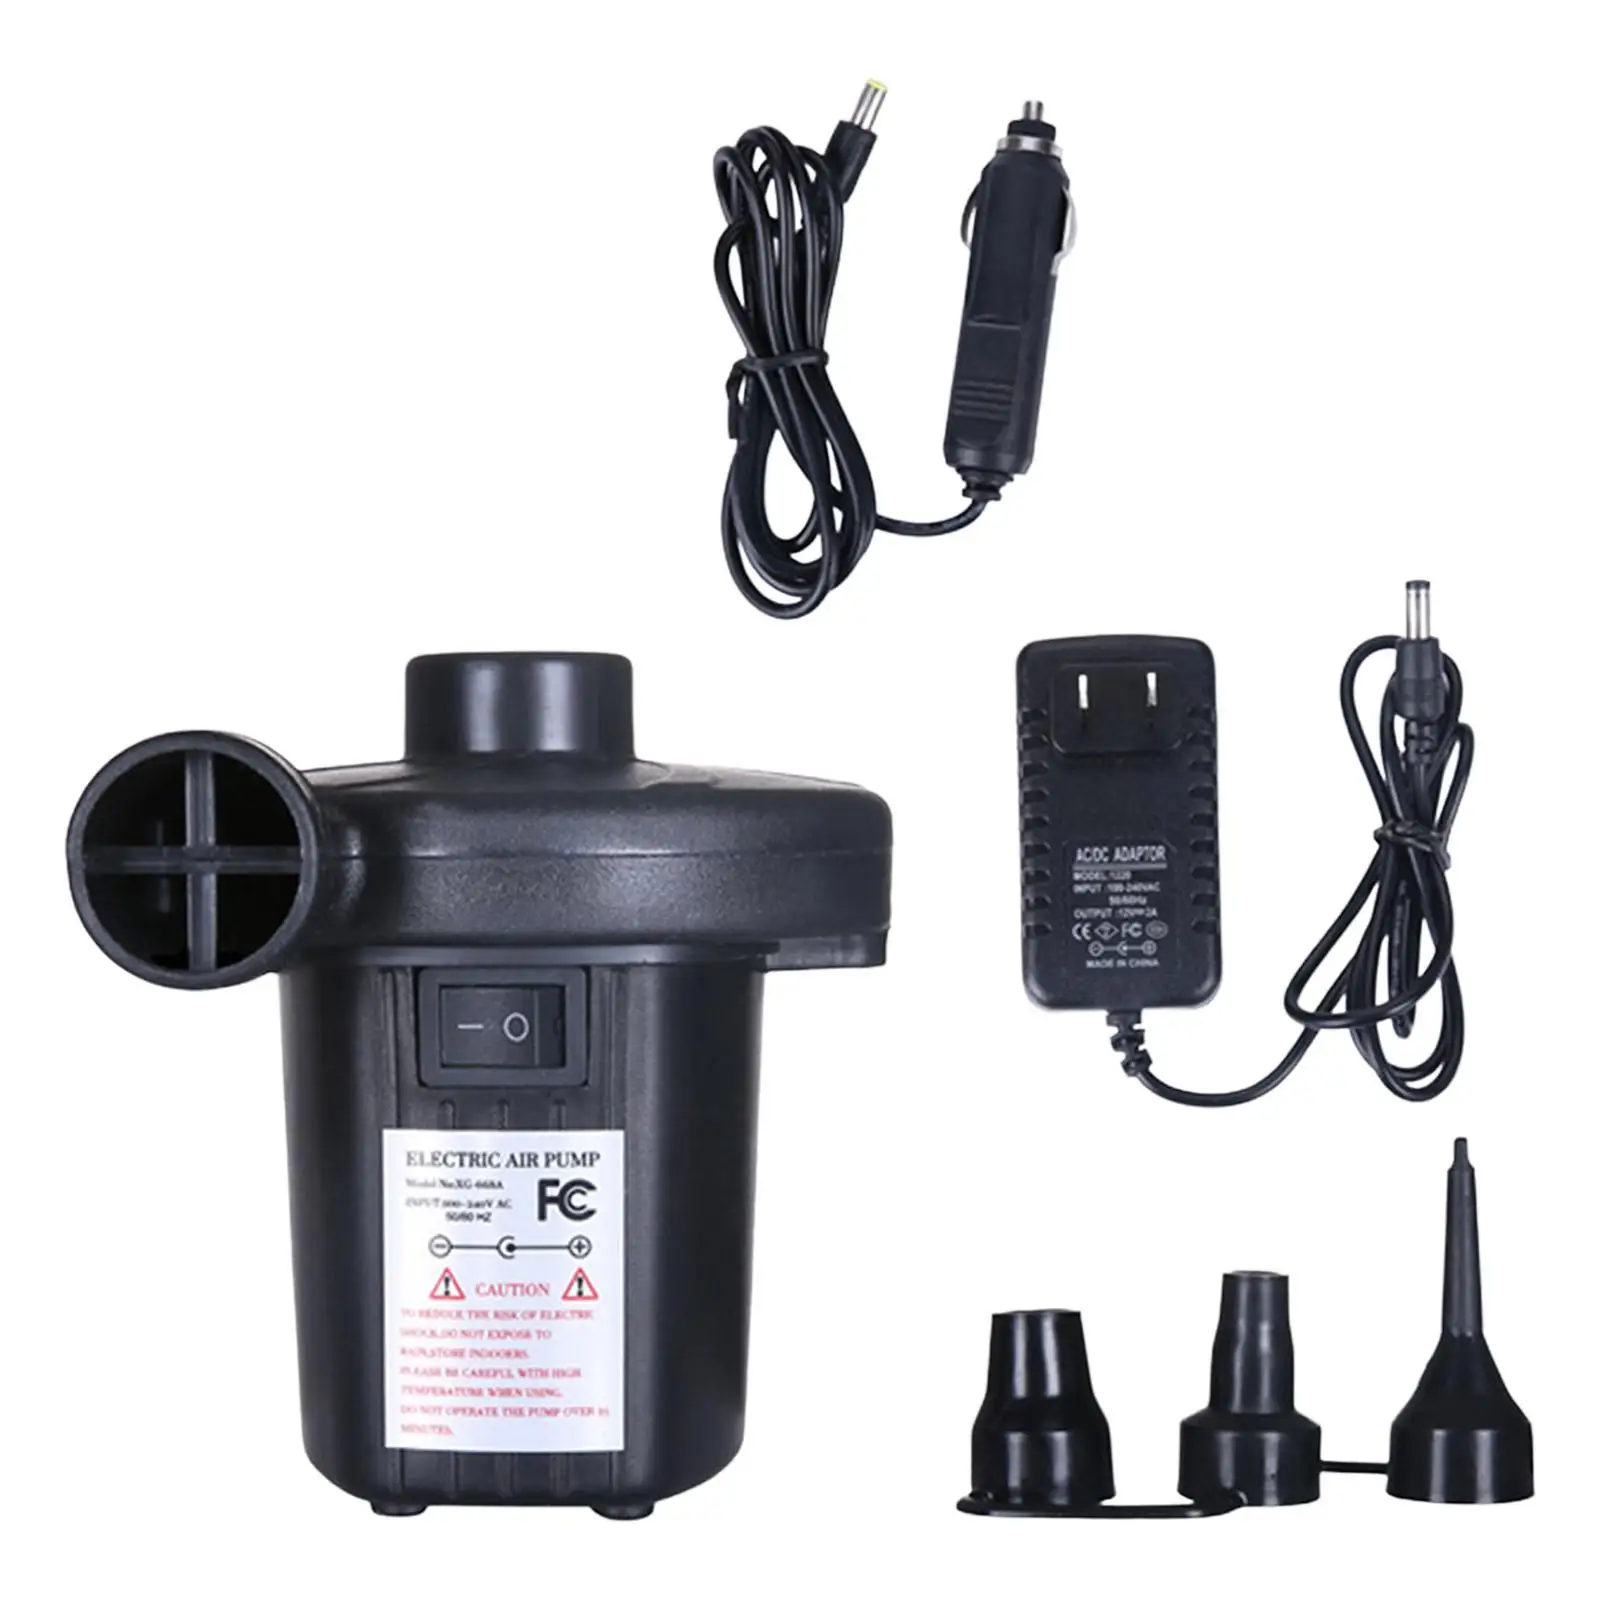 Electric Air Pump Air Mattress Pump with 3 Heads Nozzle for Air Beds Outdoor Camping